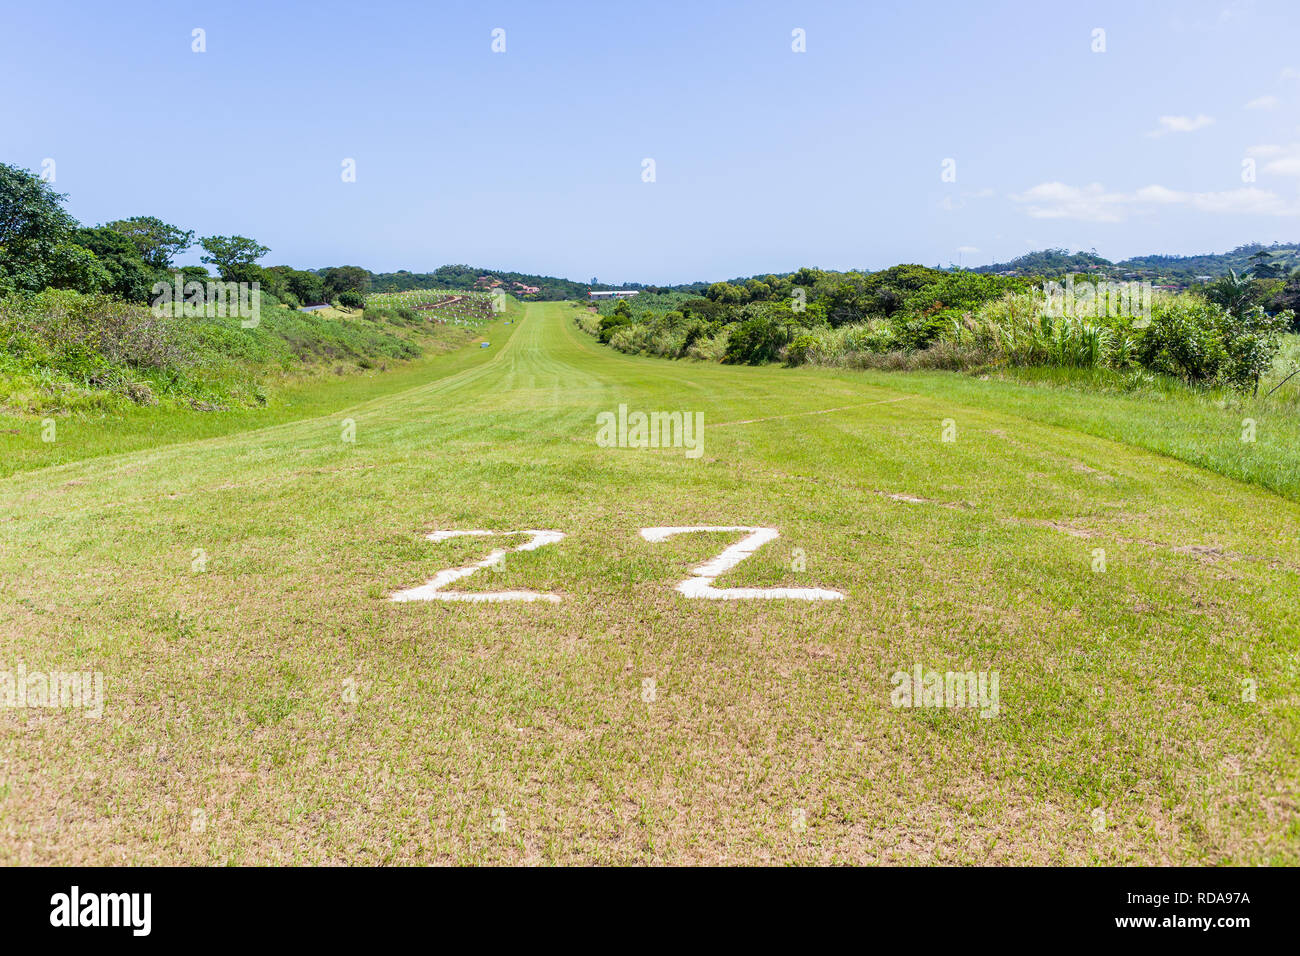 Airfield grass airstrip runway in countryside for light planes among farmland landscape. Stock Photo